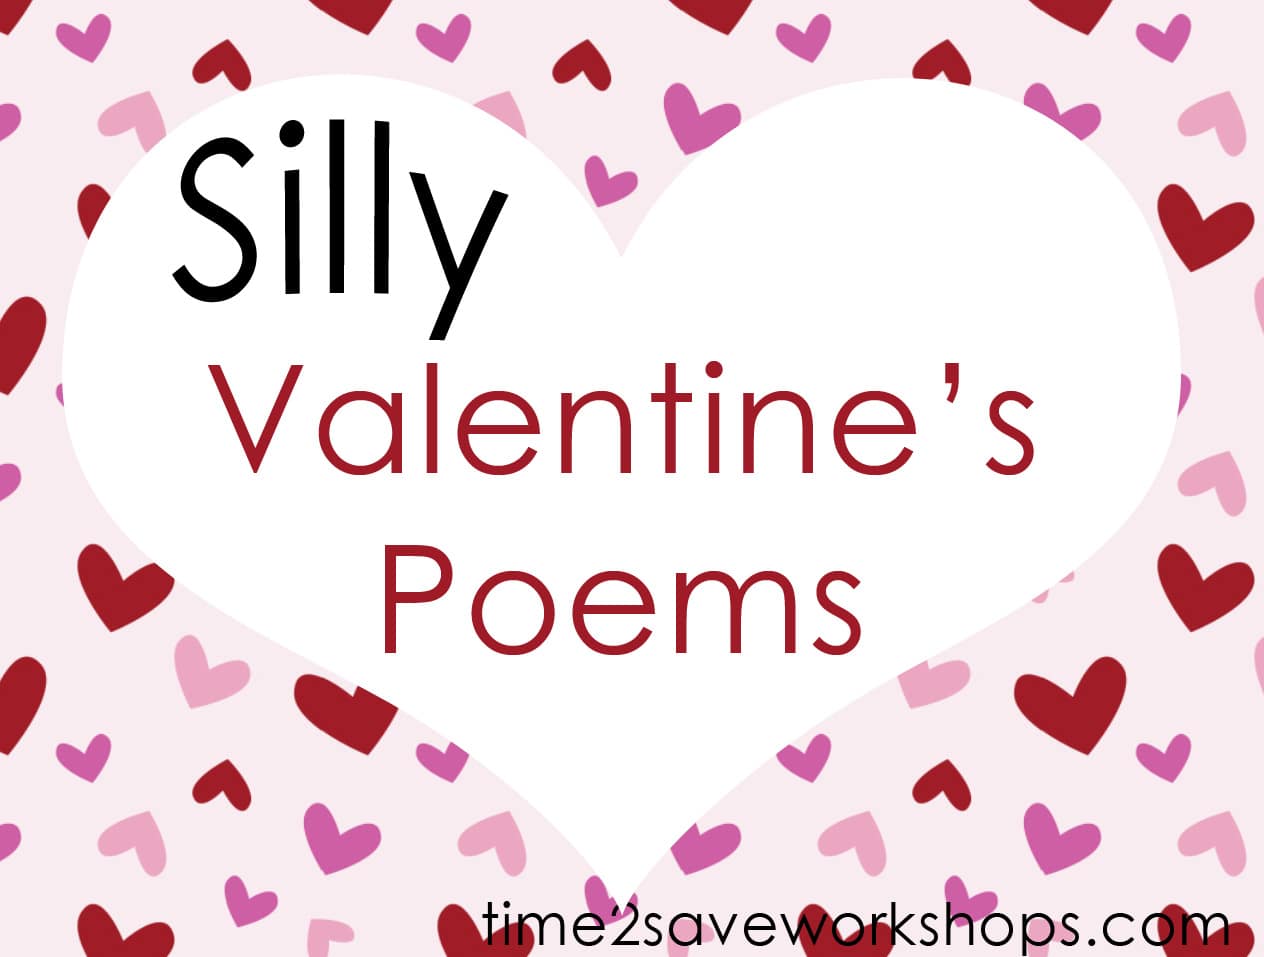 Silly Poems Valentine's: Fun with Words Poems for Children! - Kasey Trenum